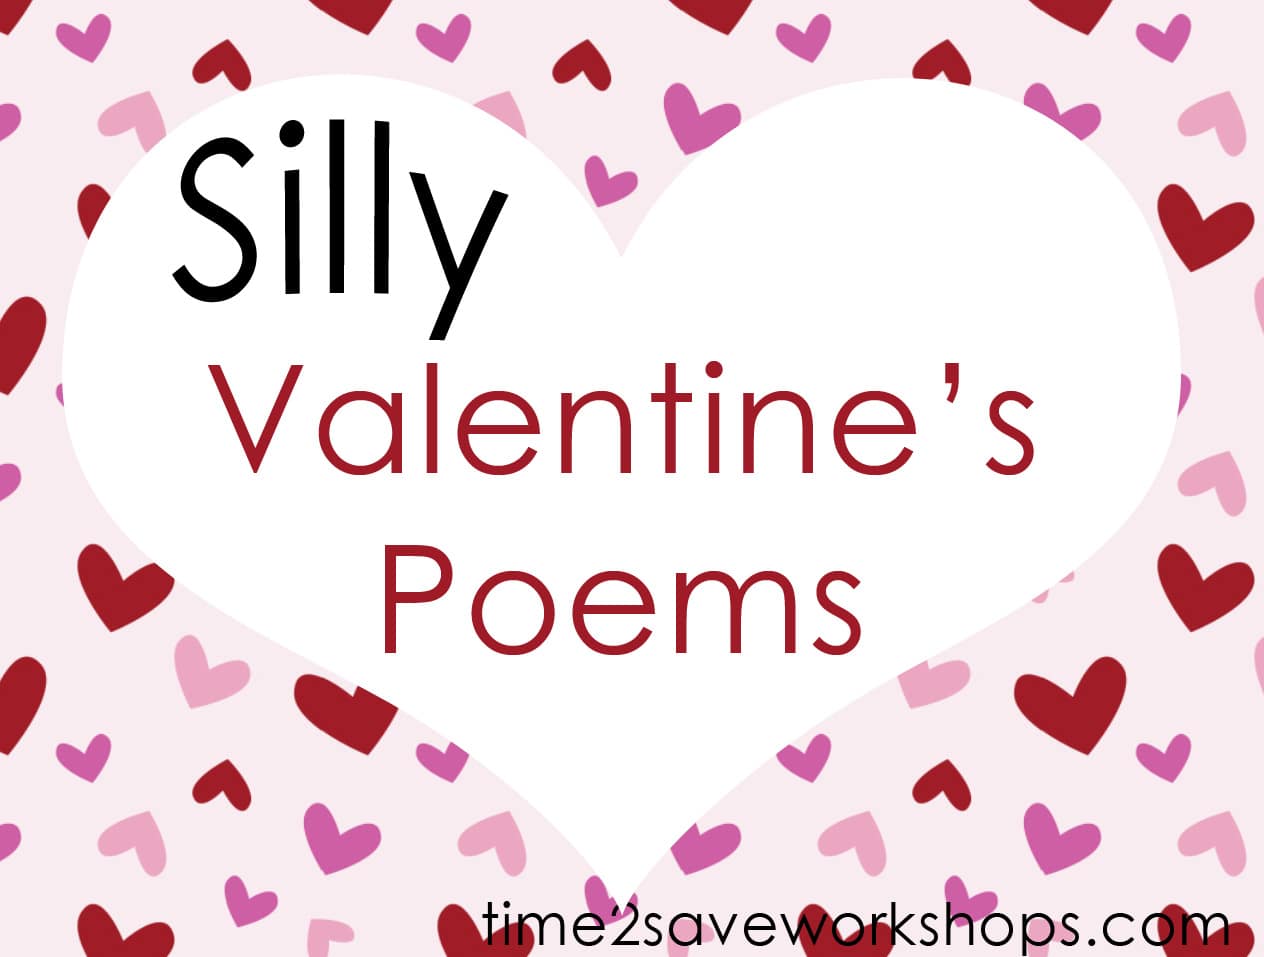 Silly Poems Valentine's: Fun with Words Poems for Children! - Kasey Trenum